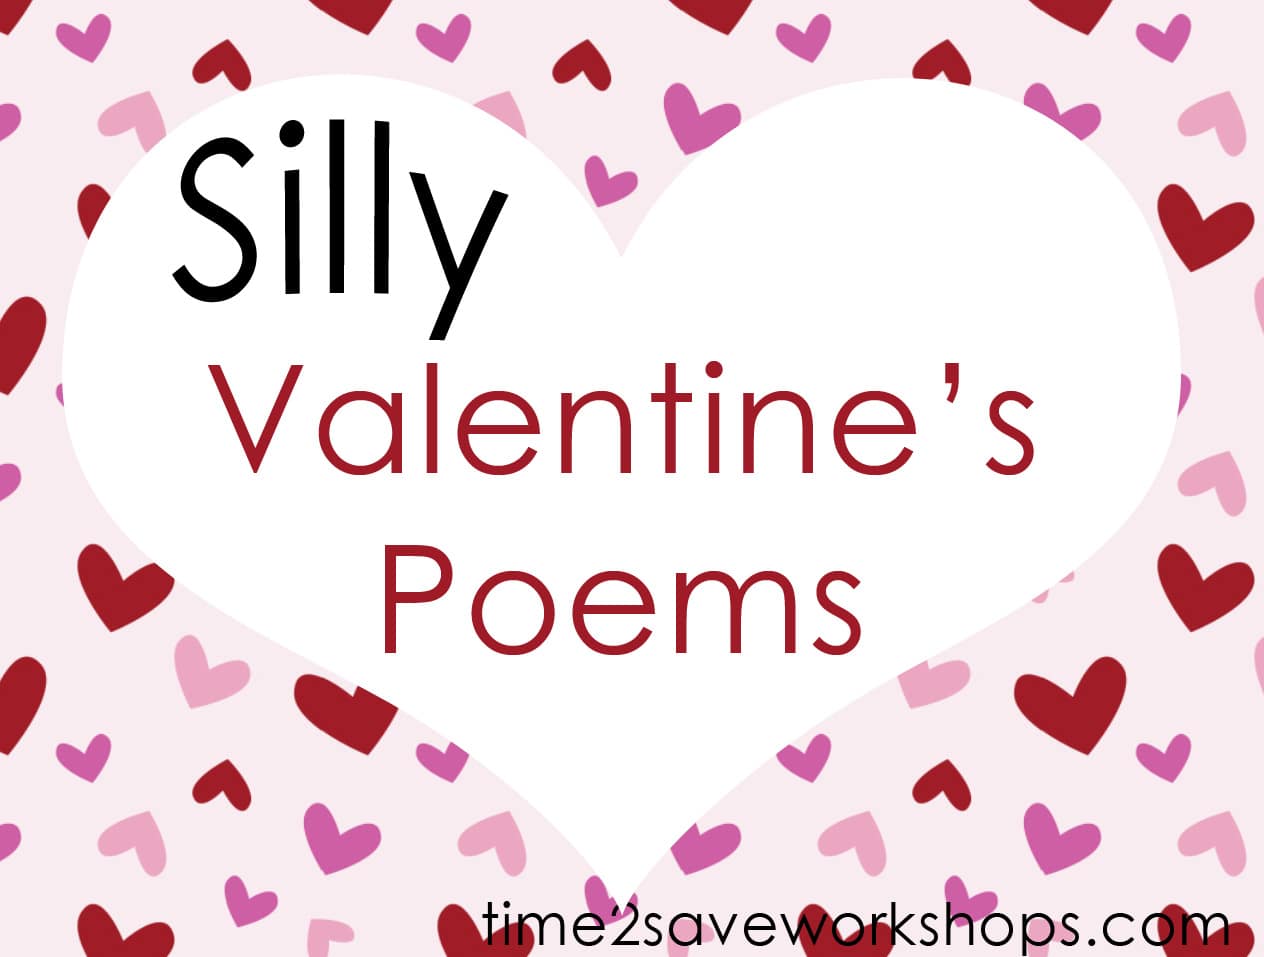 Silly Poems Valentine's: Fun with Words Poems for Children! - Kasey Trenum